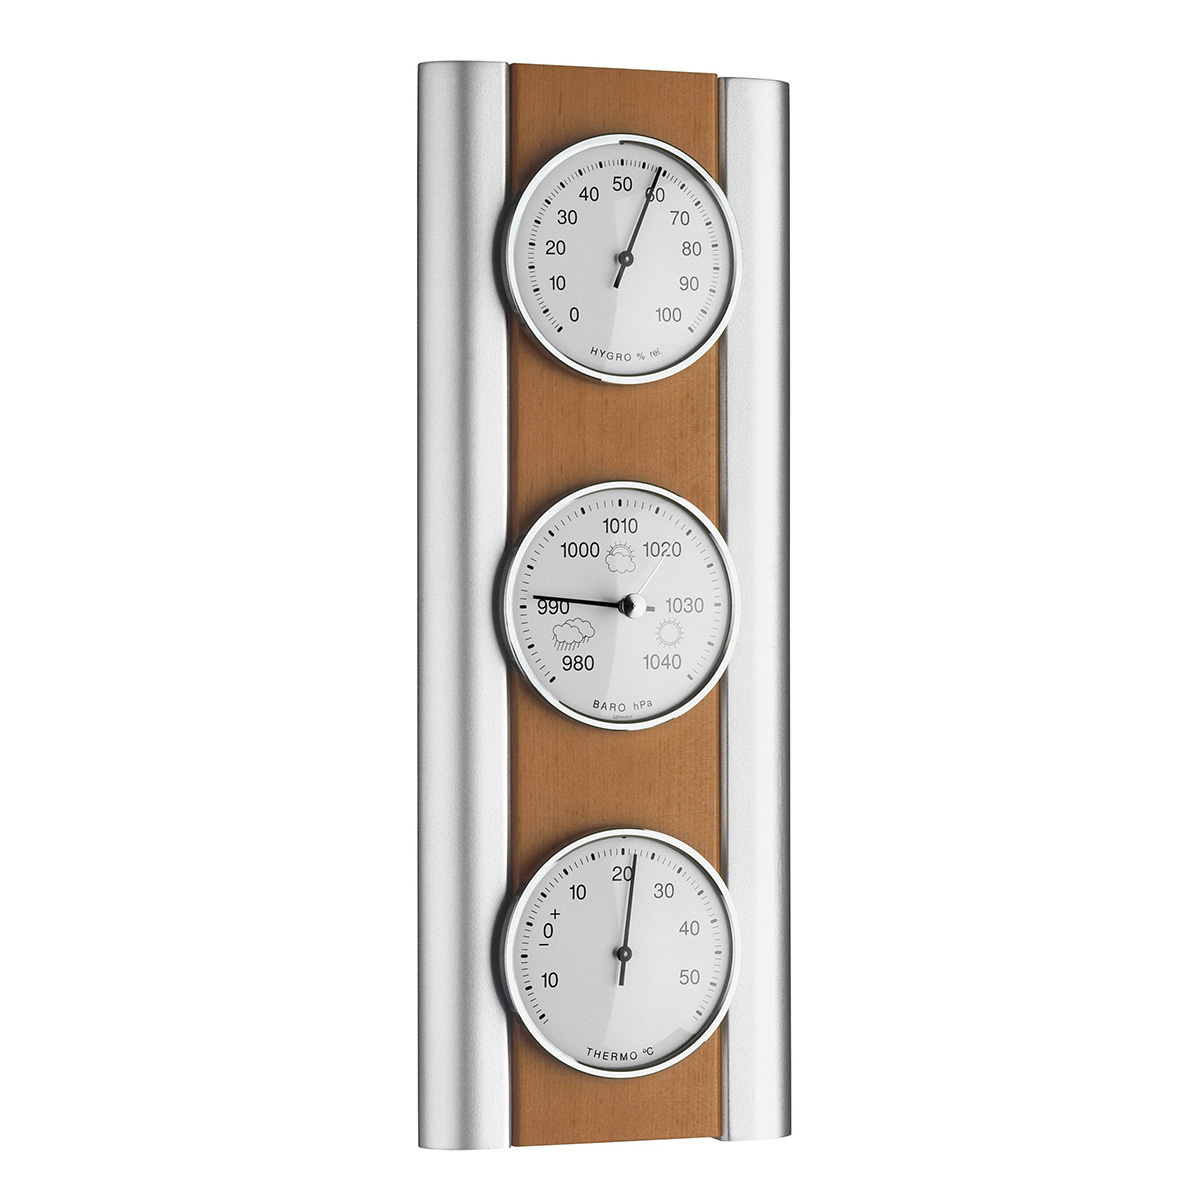 Wireless weather station in the form of analog wall clock with